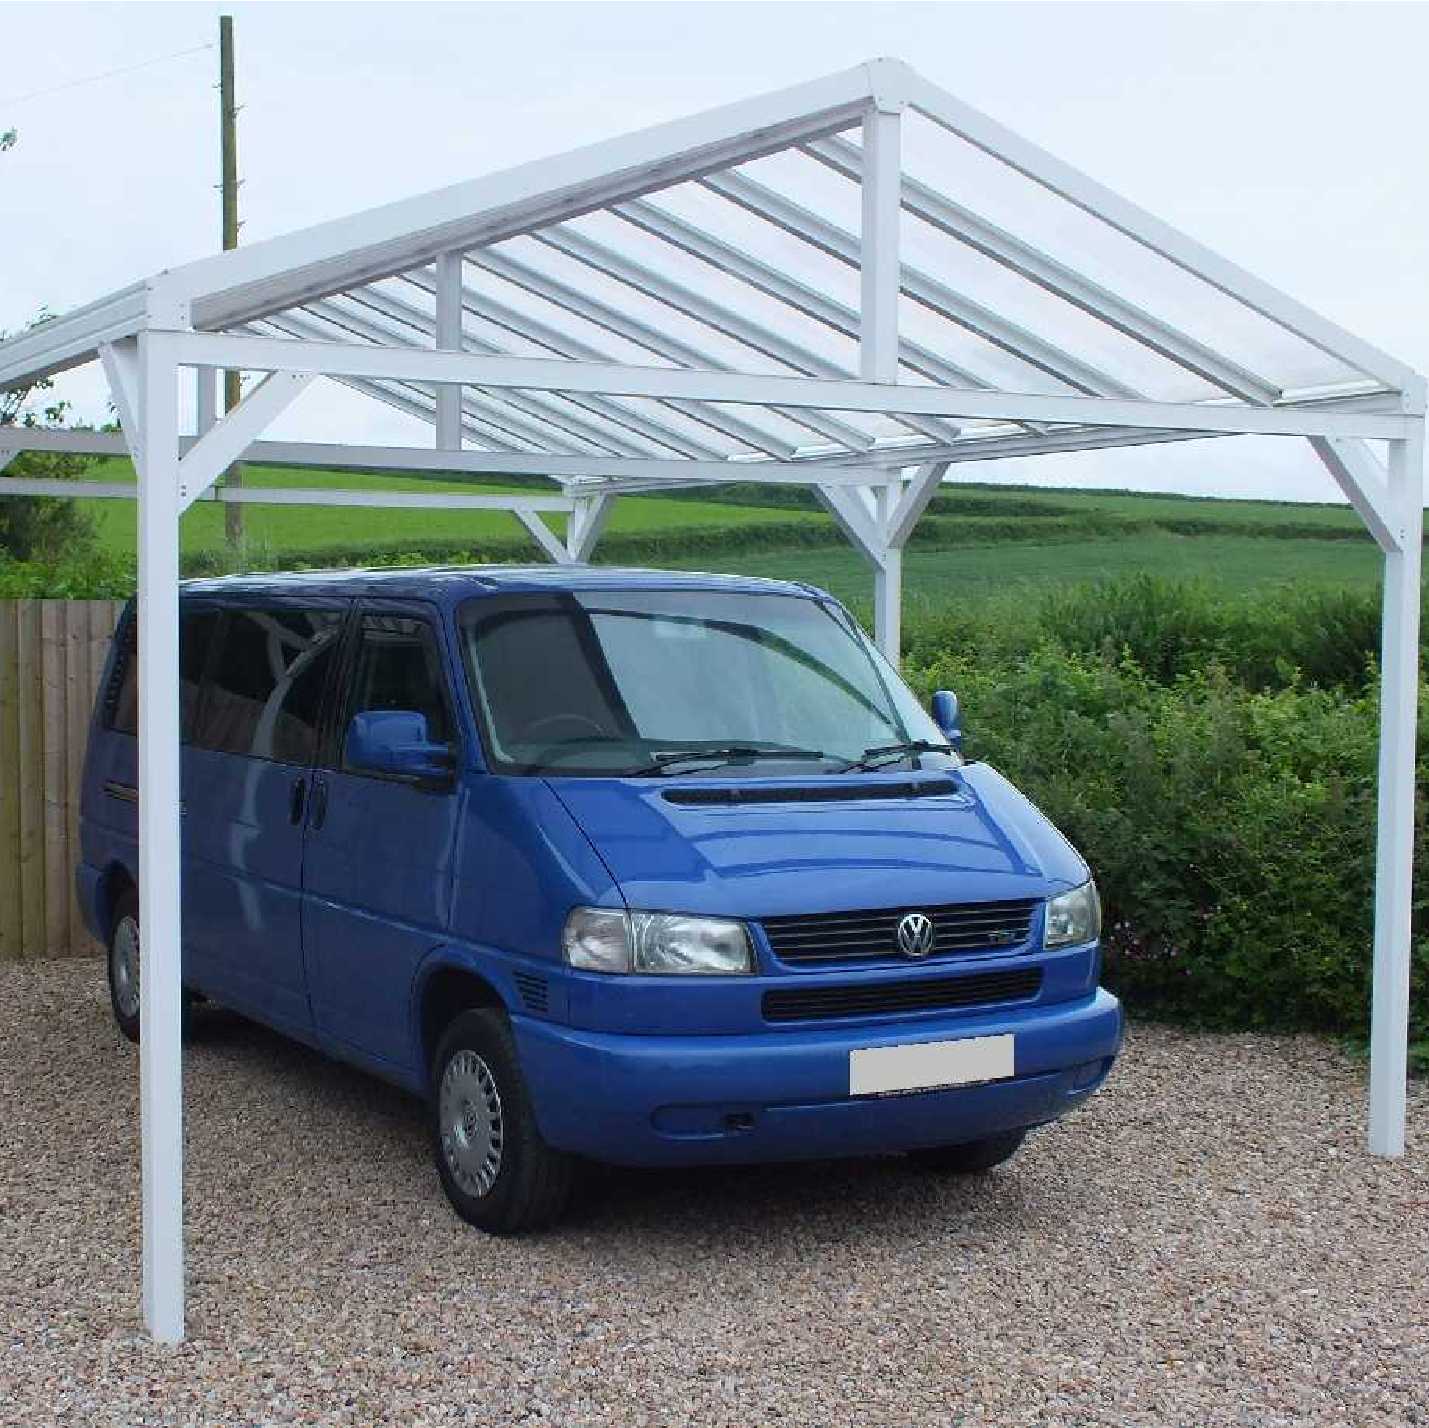 Omega Smart Free-Standing, White Gable-Roof (type 1) Canopy with 16mm Polycarbonate Glazing - 6.3m (W) x 3.5m (P), (8) Supporting Posts